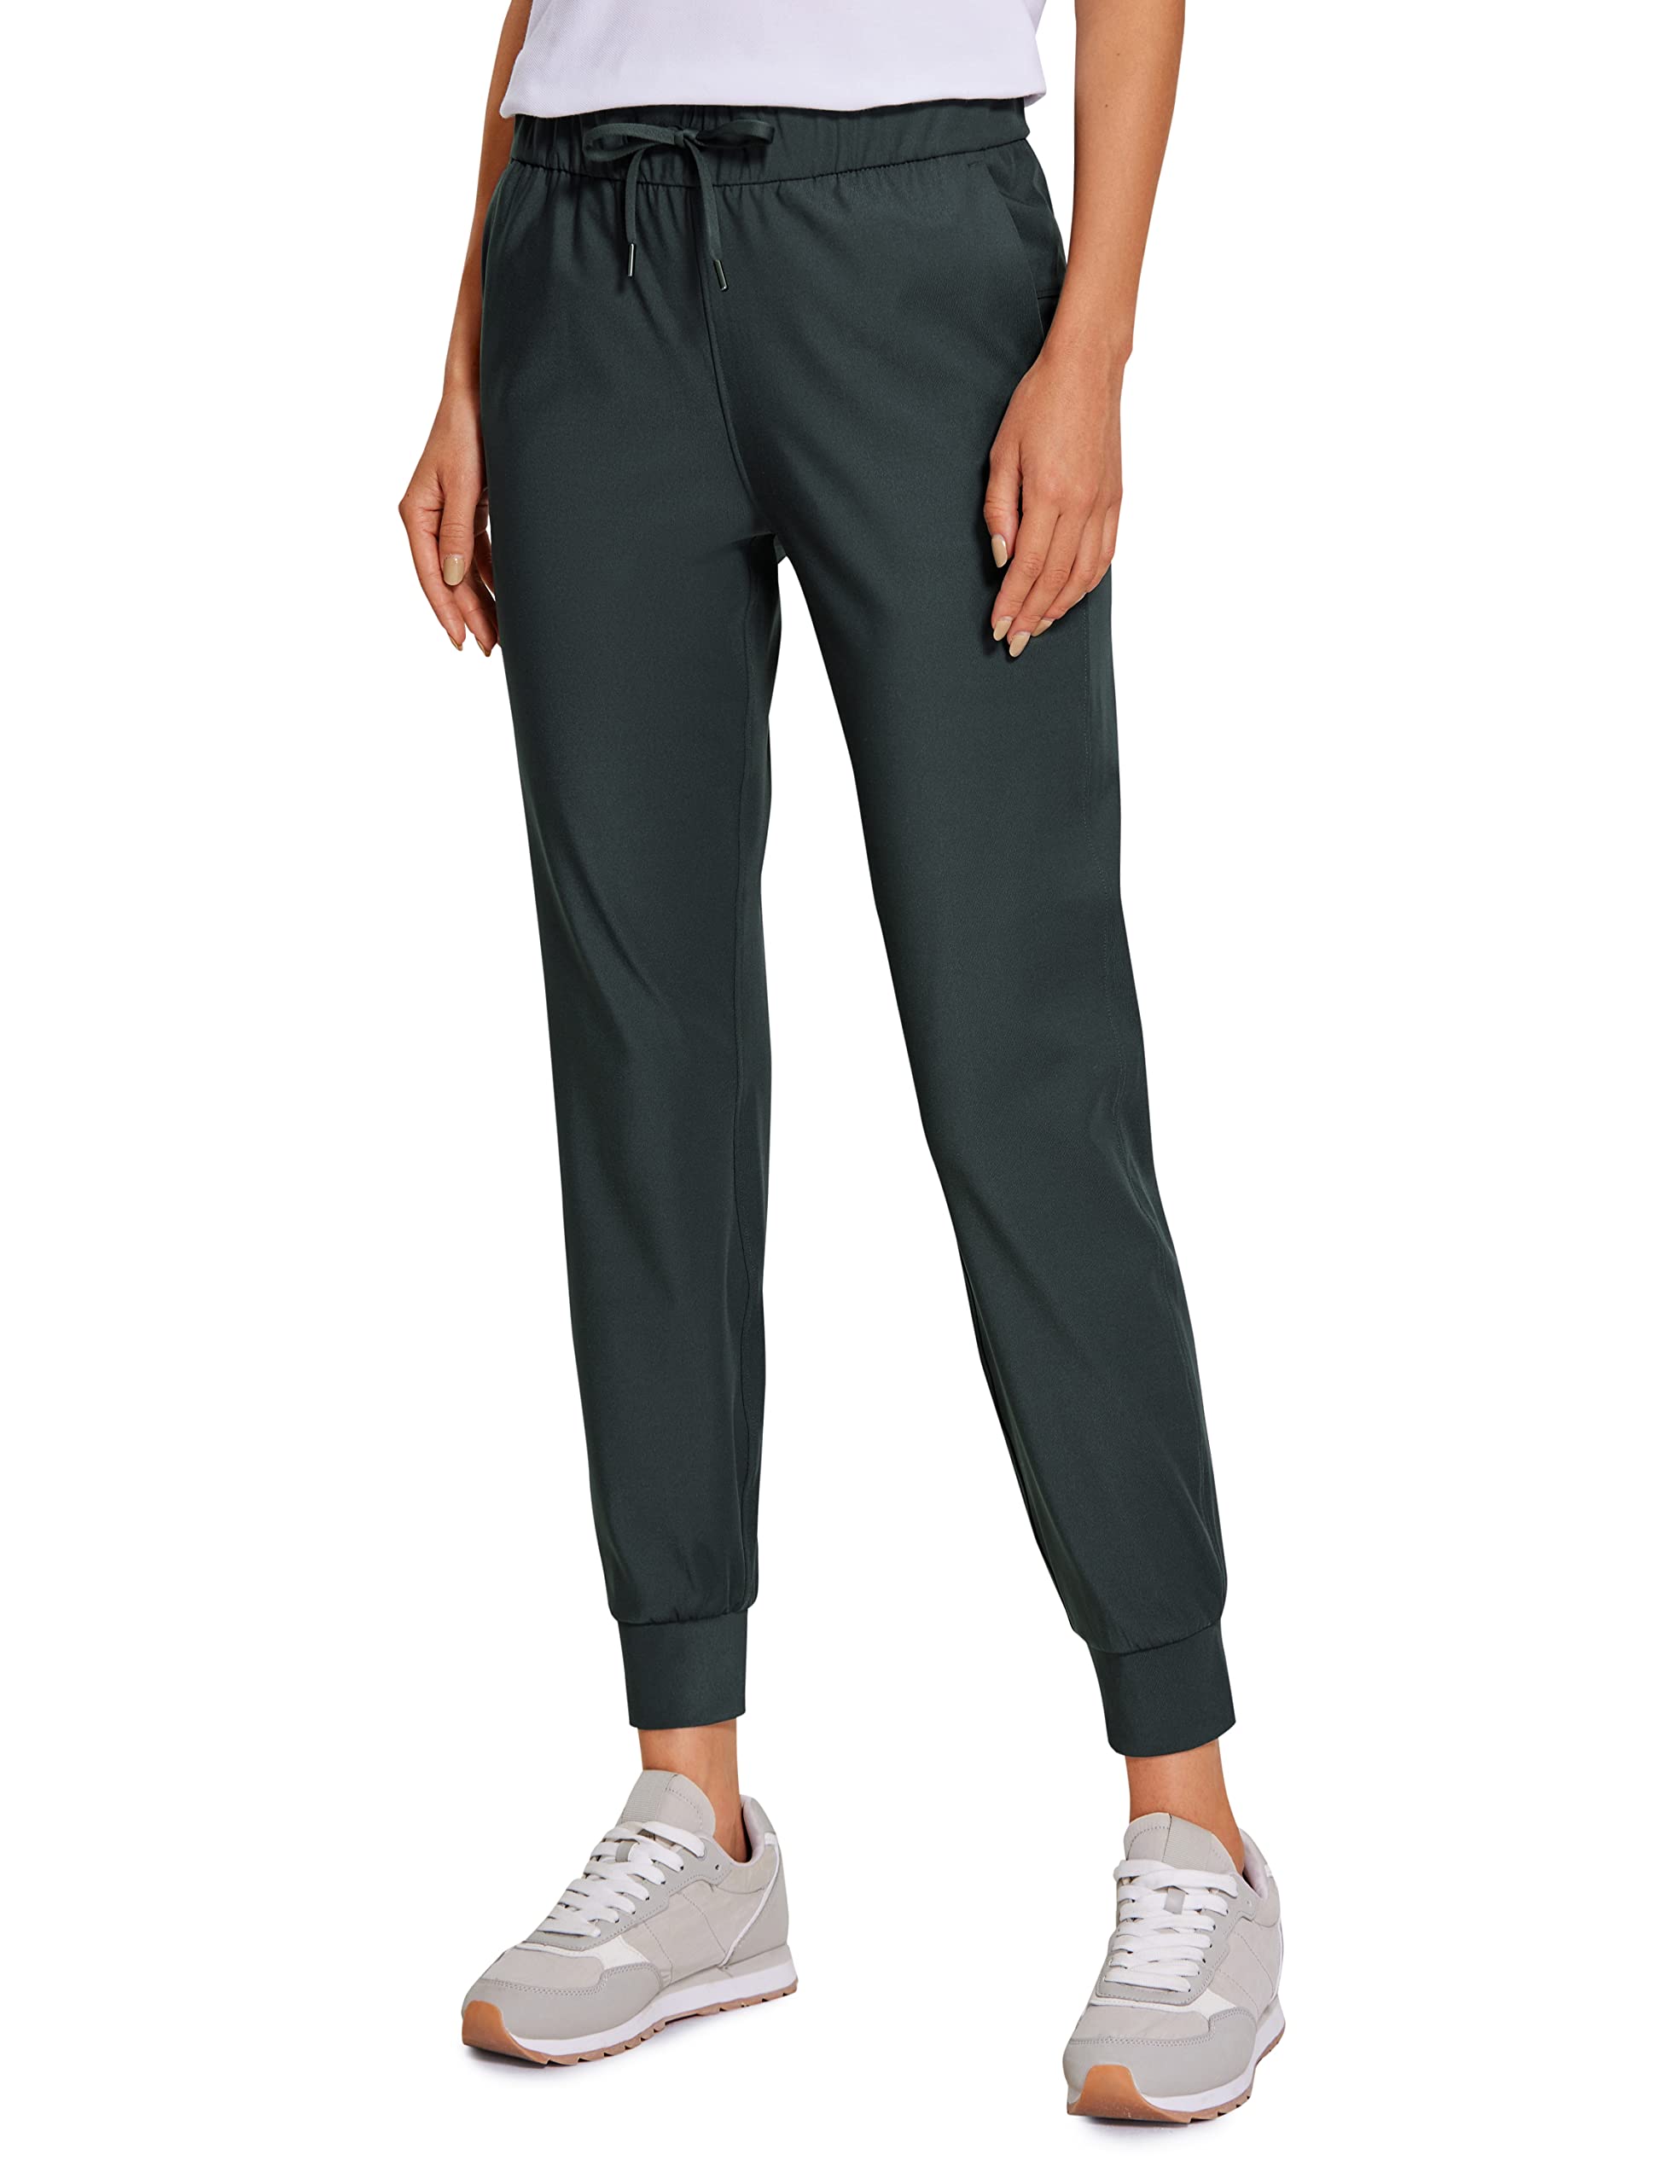 CRZ YOGA Crz Yoga 4-Way Stretch Golf Joggers For Women, 27 Casual Travel  Workout Pants, Lounge Athletic Sweatpants With Pockets Melanite